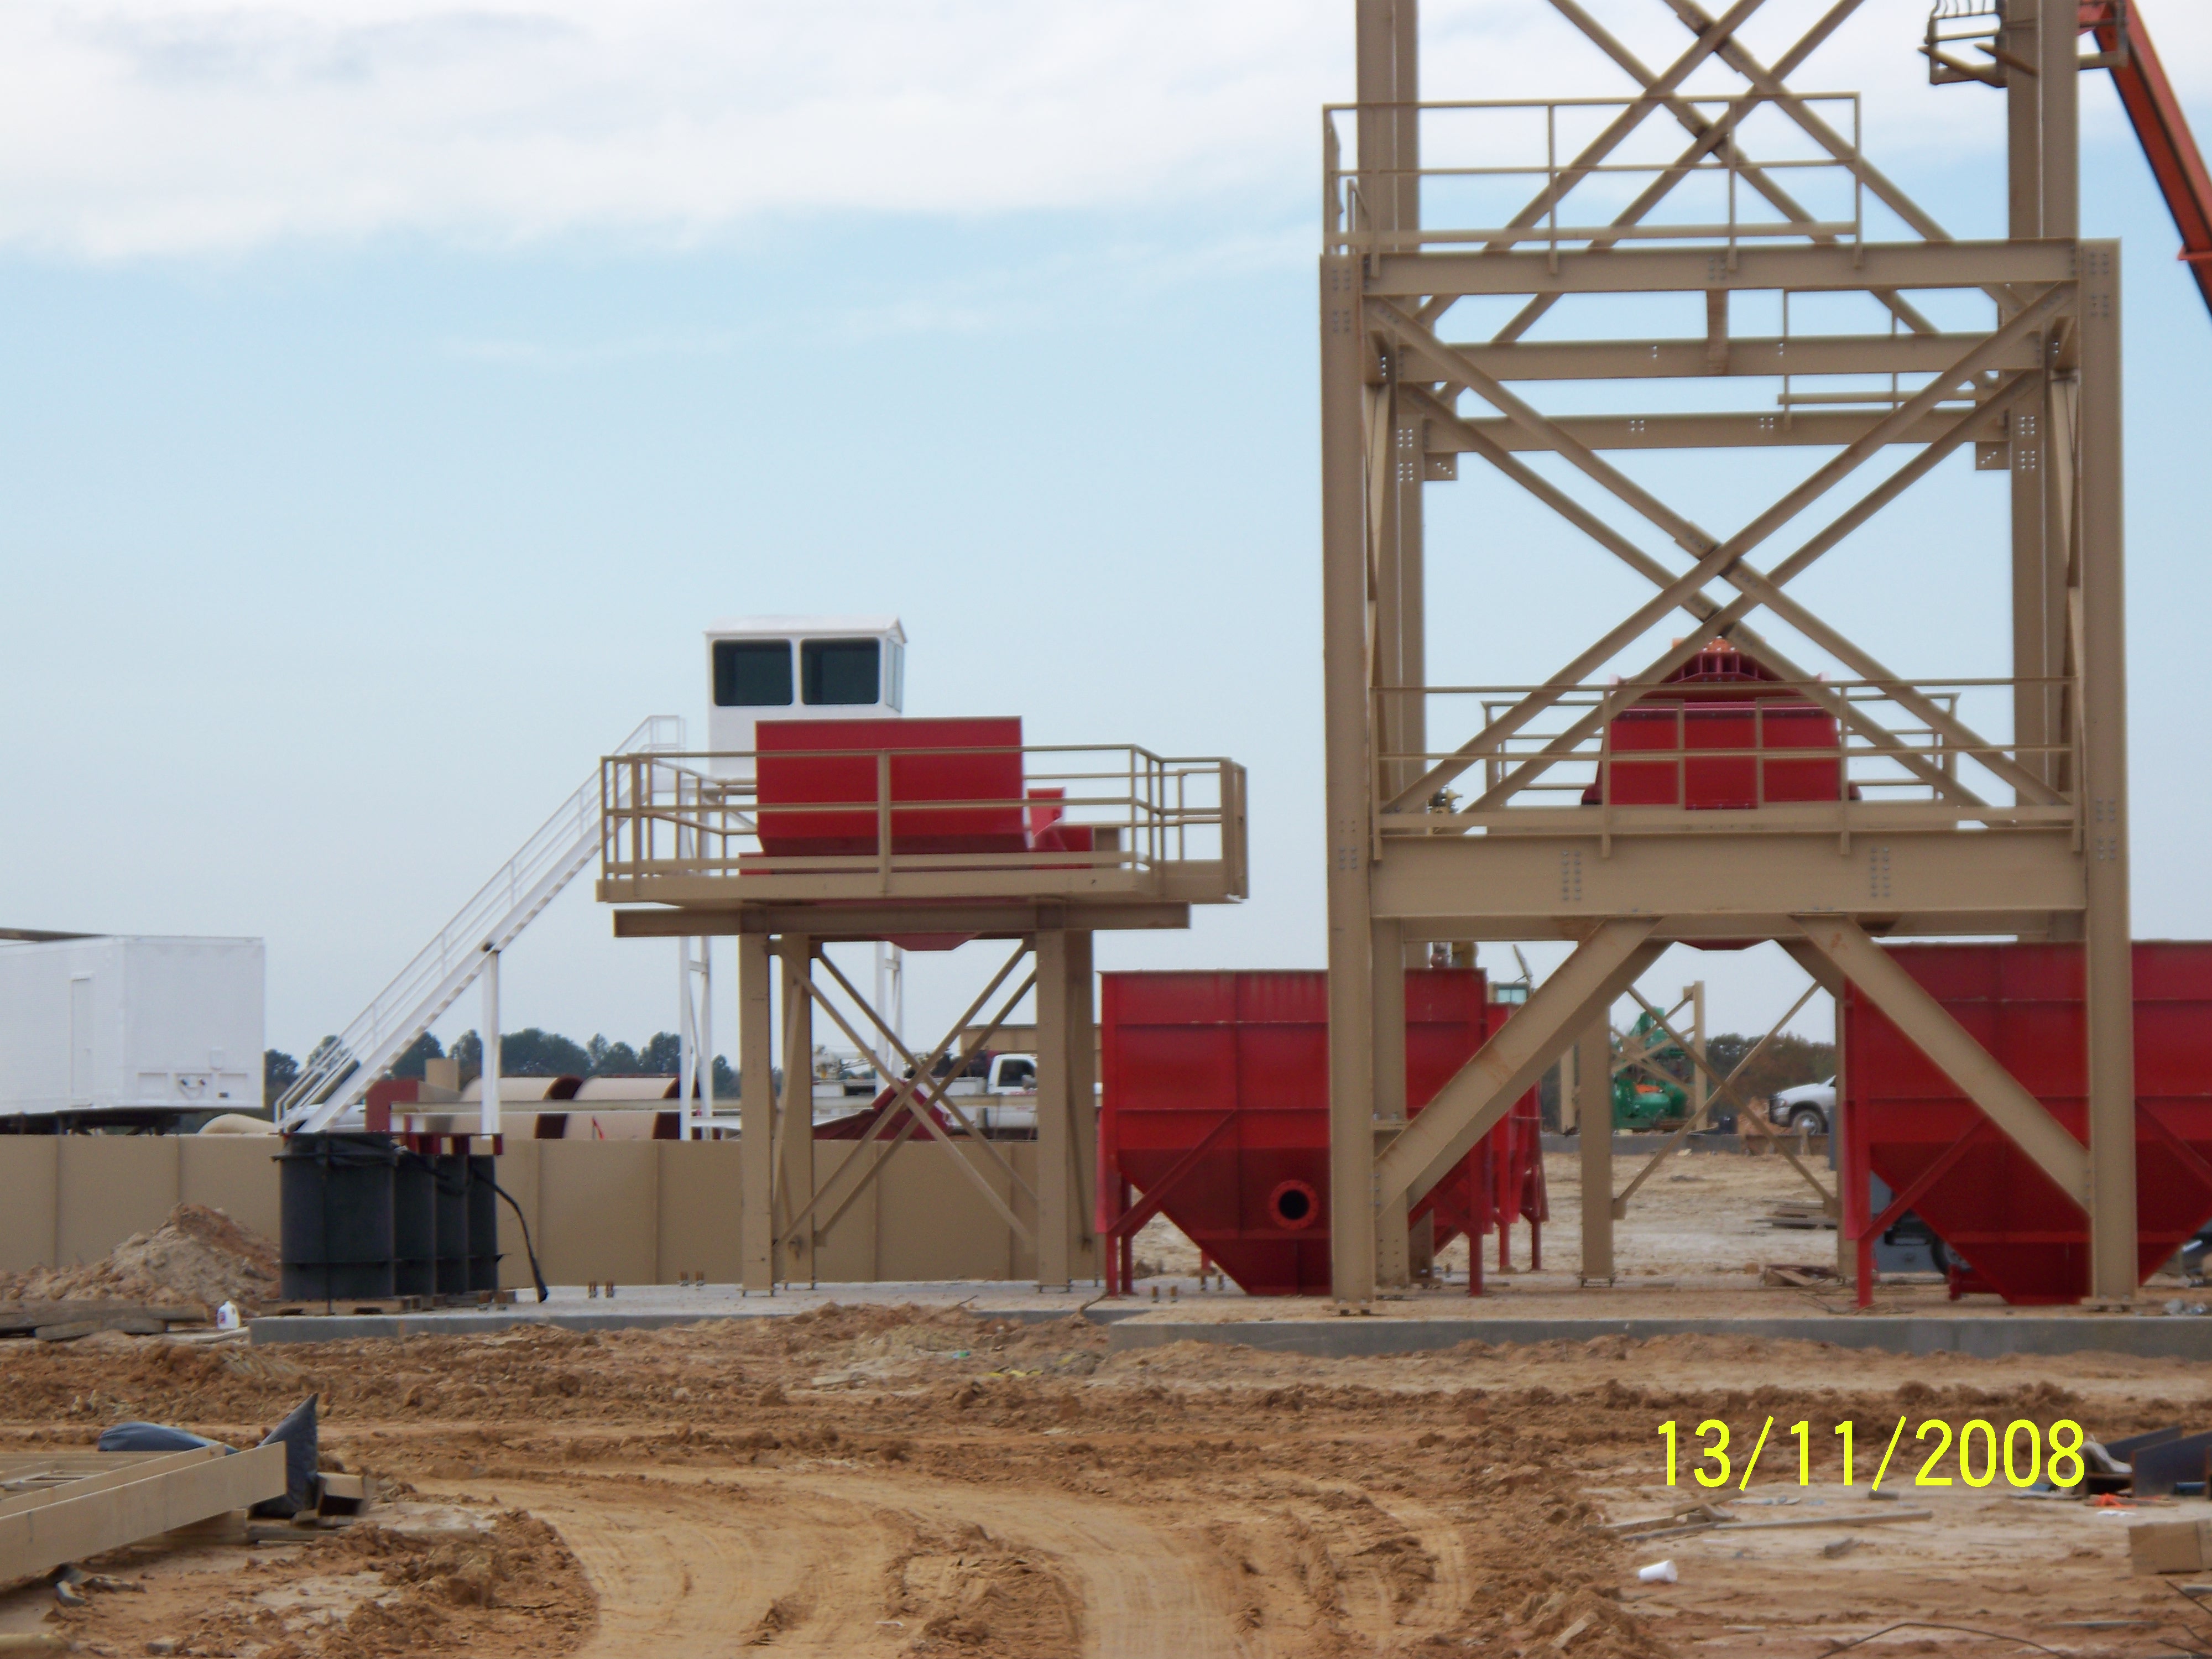 New sand plant being built in Texas under Project Engineering and Management by Blethen Mining Associates, PC